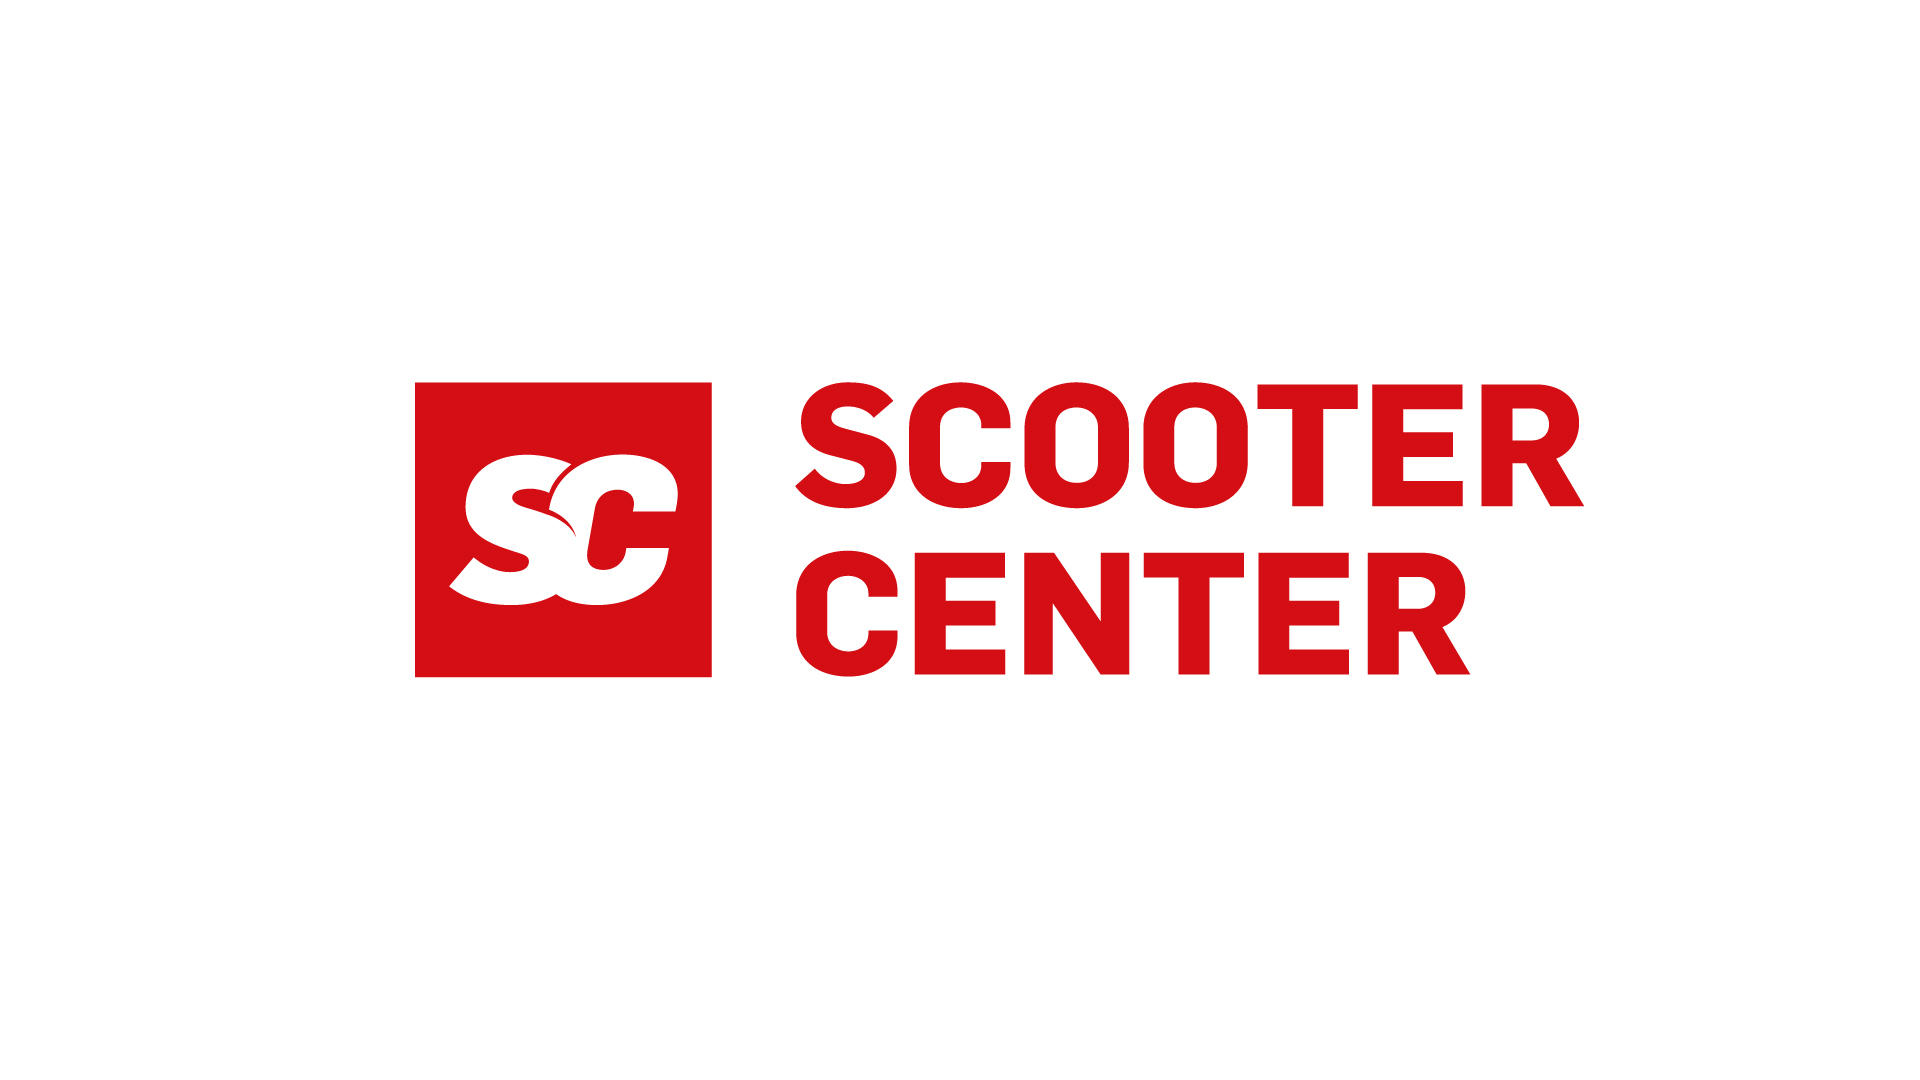 SC - SCOOTER CENTER